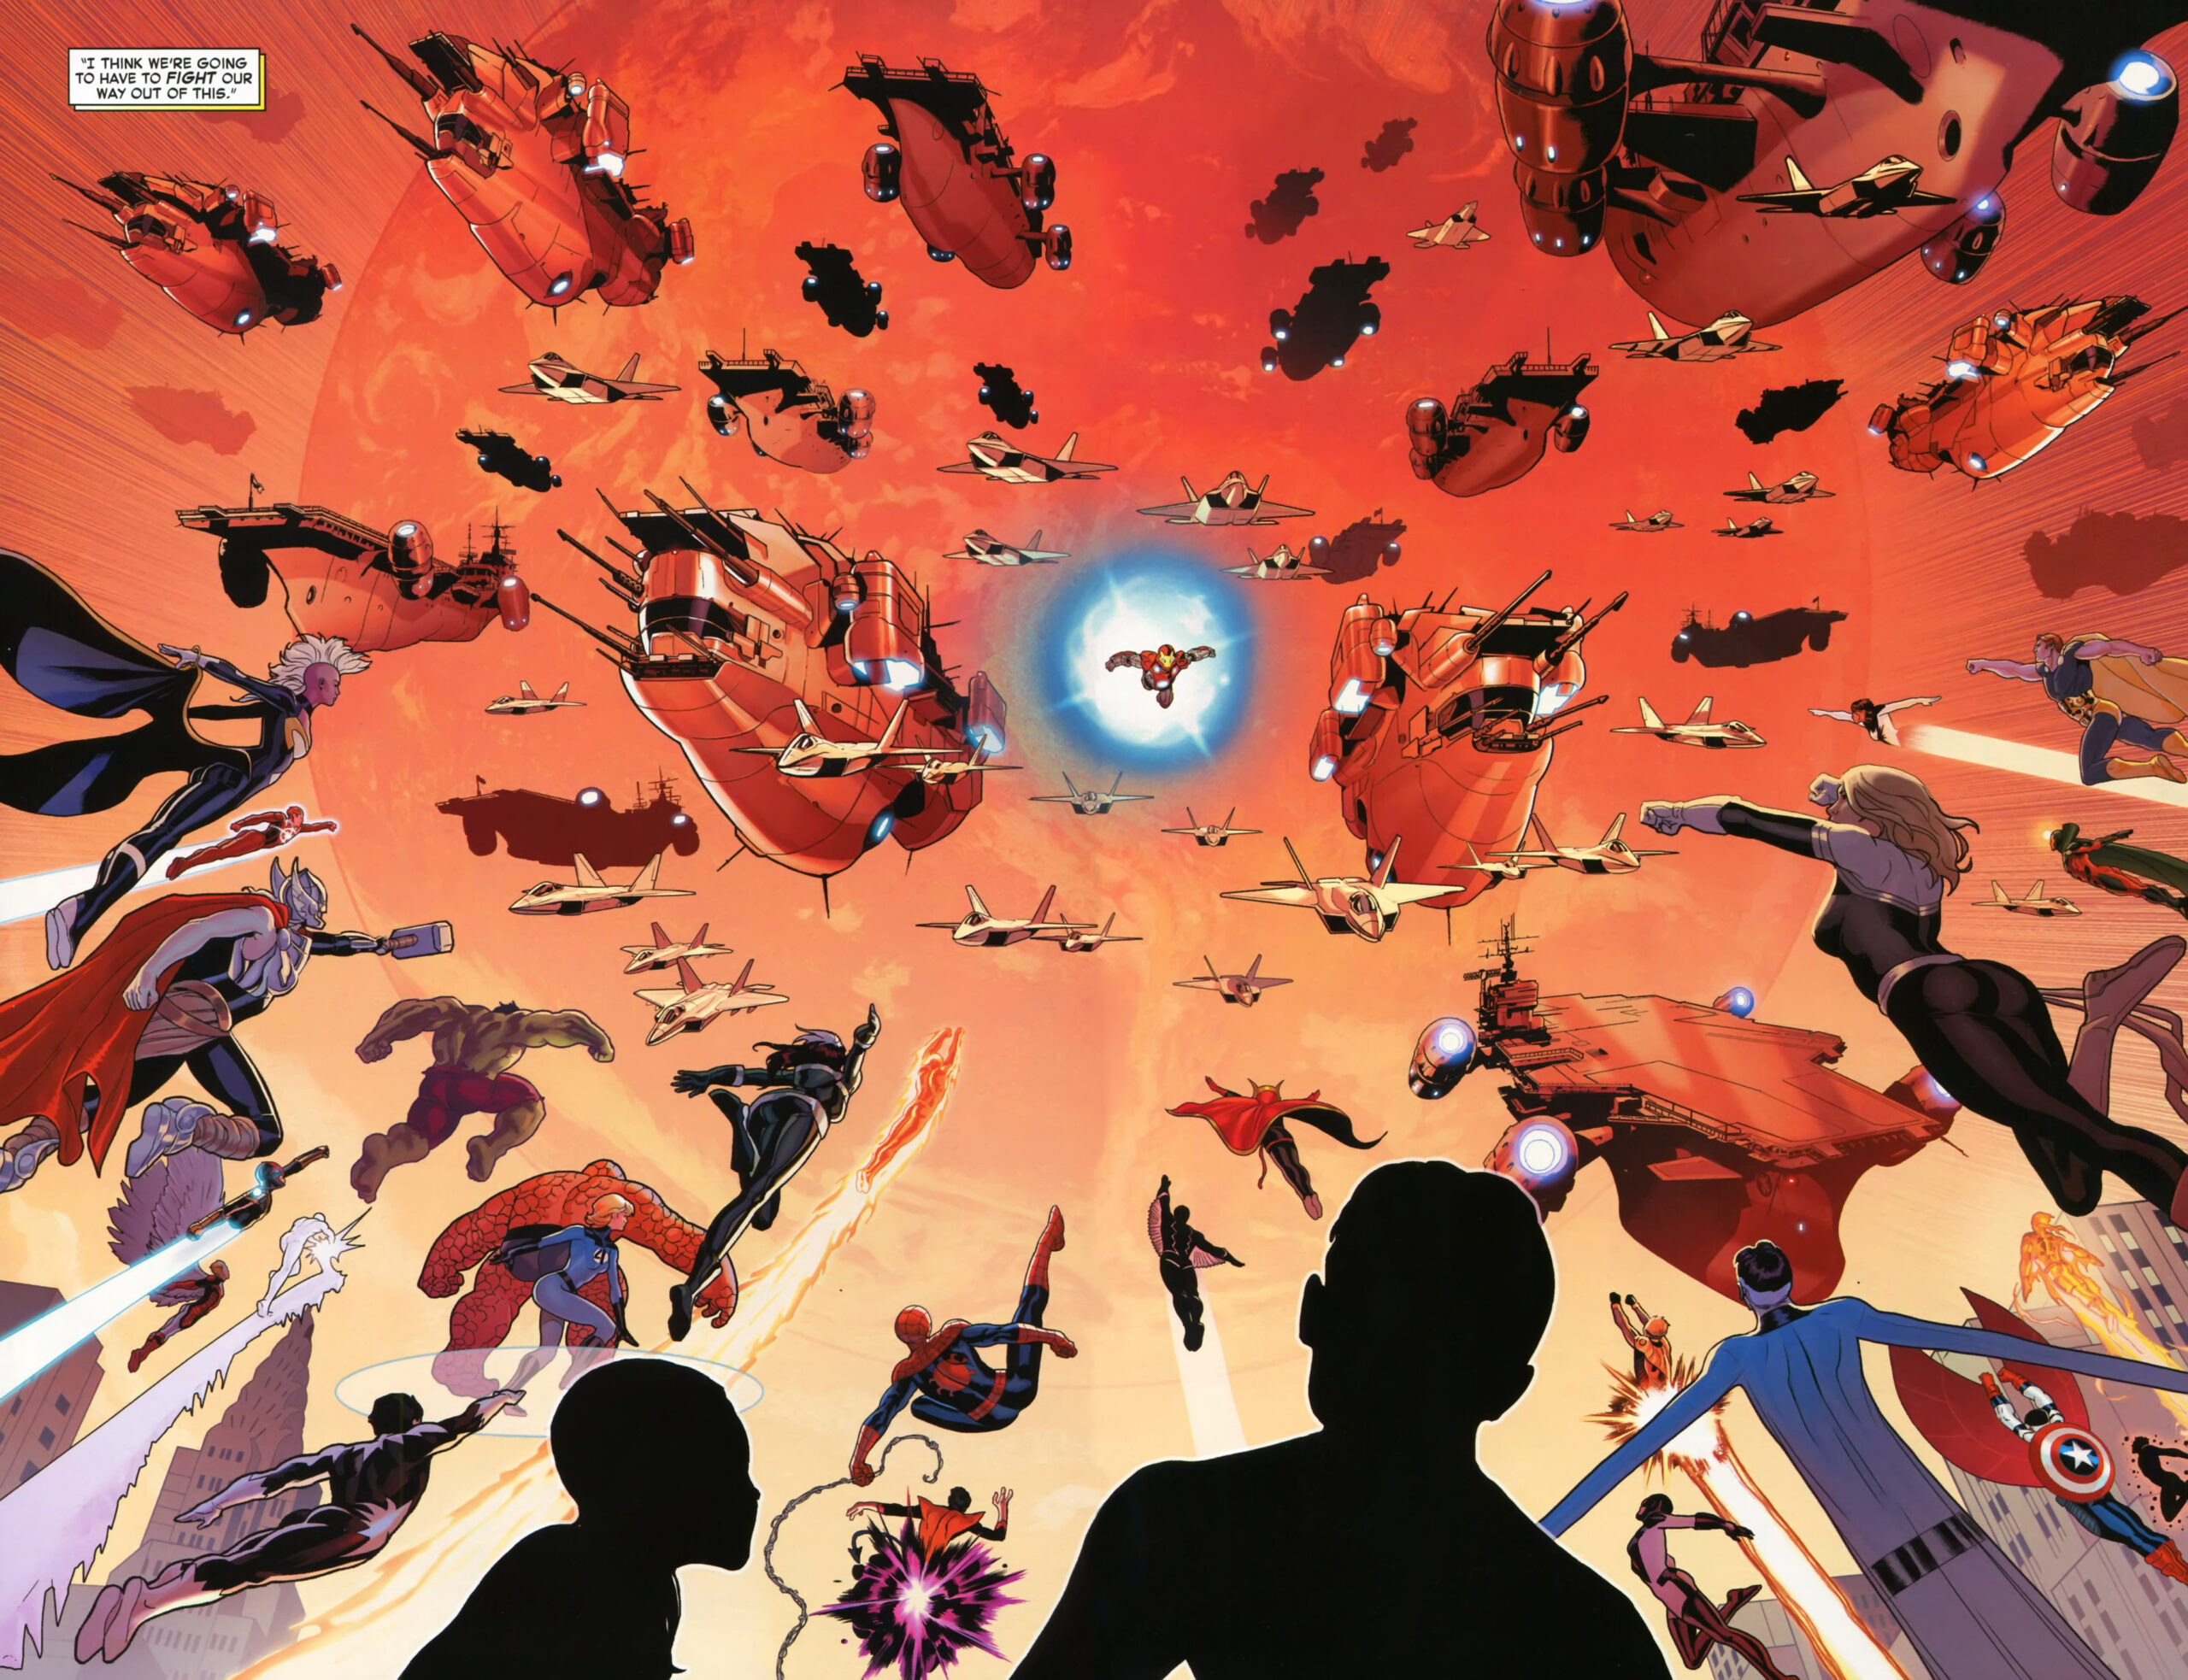 The 1610 and 616 fight for survival amidst the final incursion in Secret Wars Vol 1 #0 (2015), Marvel Comics. Words by Jonathan Hickman, art by Paul Renaud and Chris Eliopoulos.